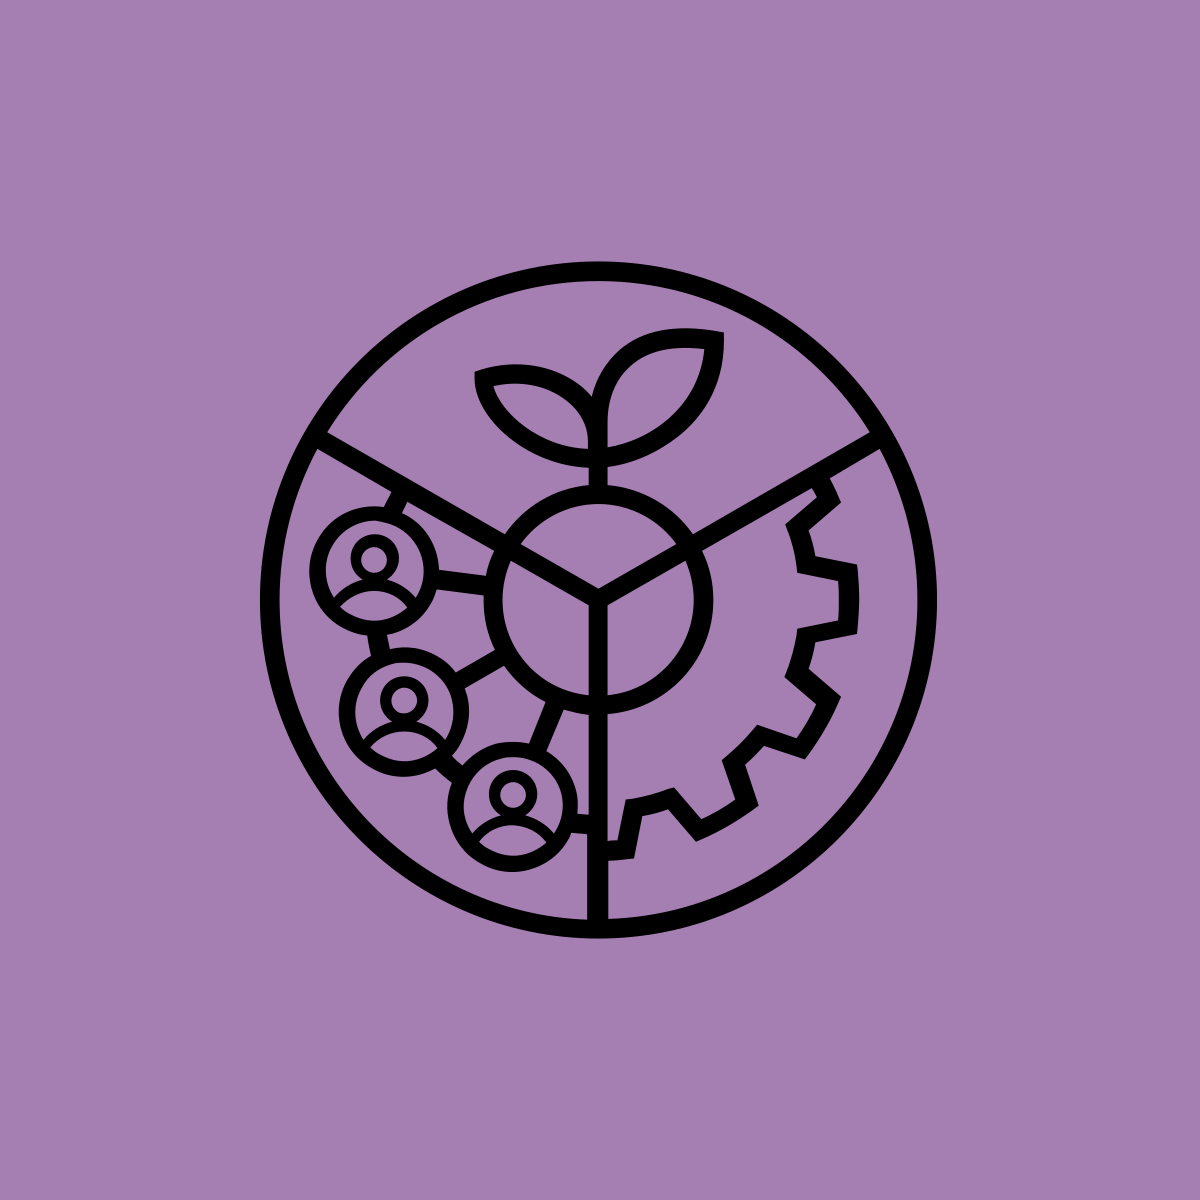 Illustration on a lilac background showing a clocklike circle separated in 3: (1) illustrating 3 individuals connected to the centre (2) a leaf and (3) a mechanical gear to make the wheel turn.